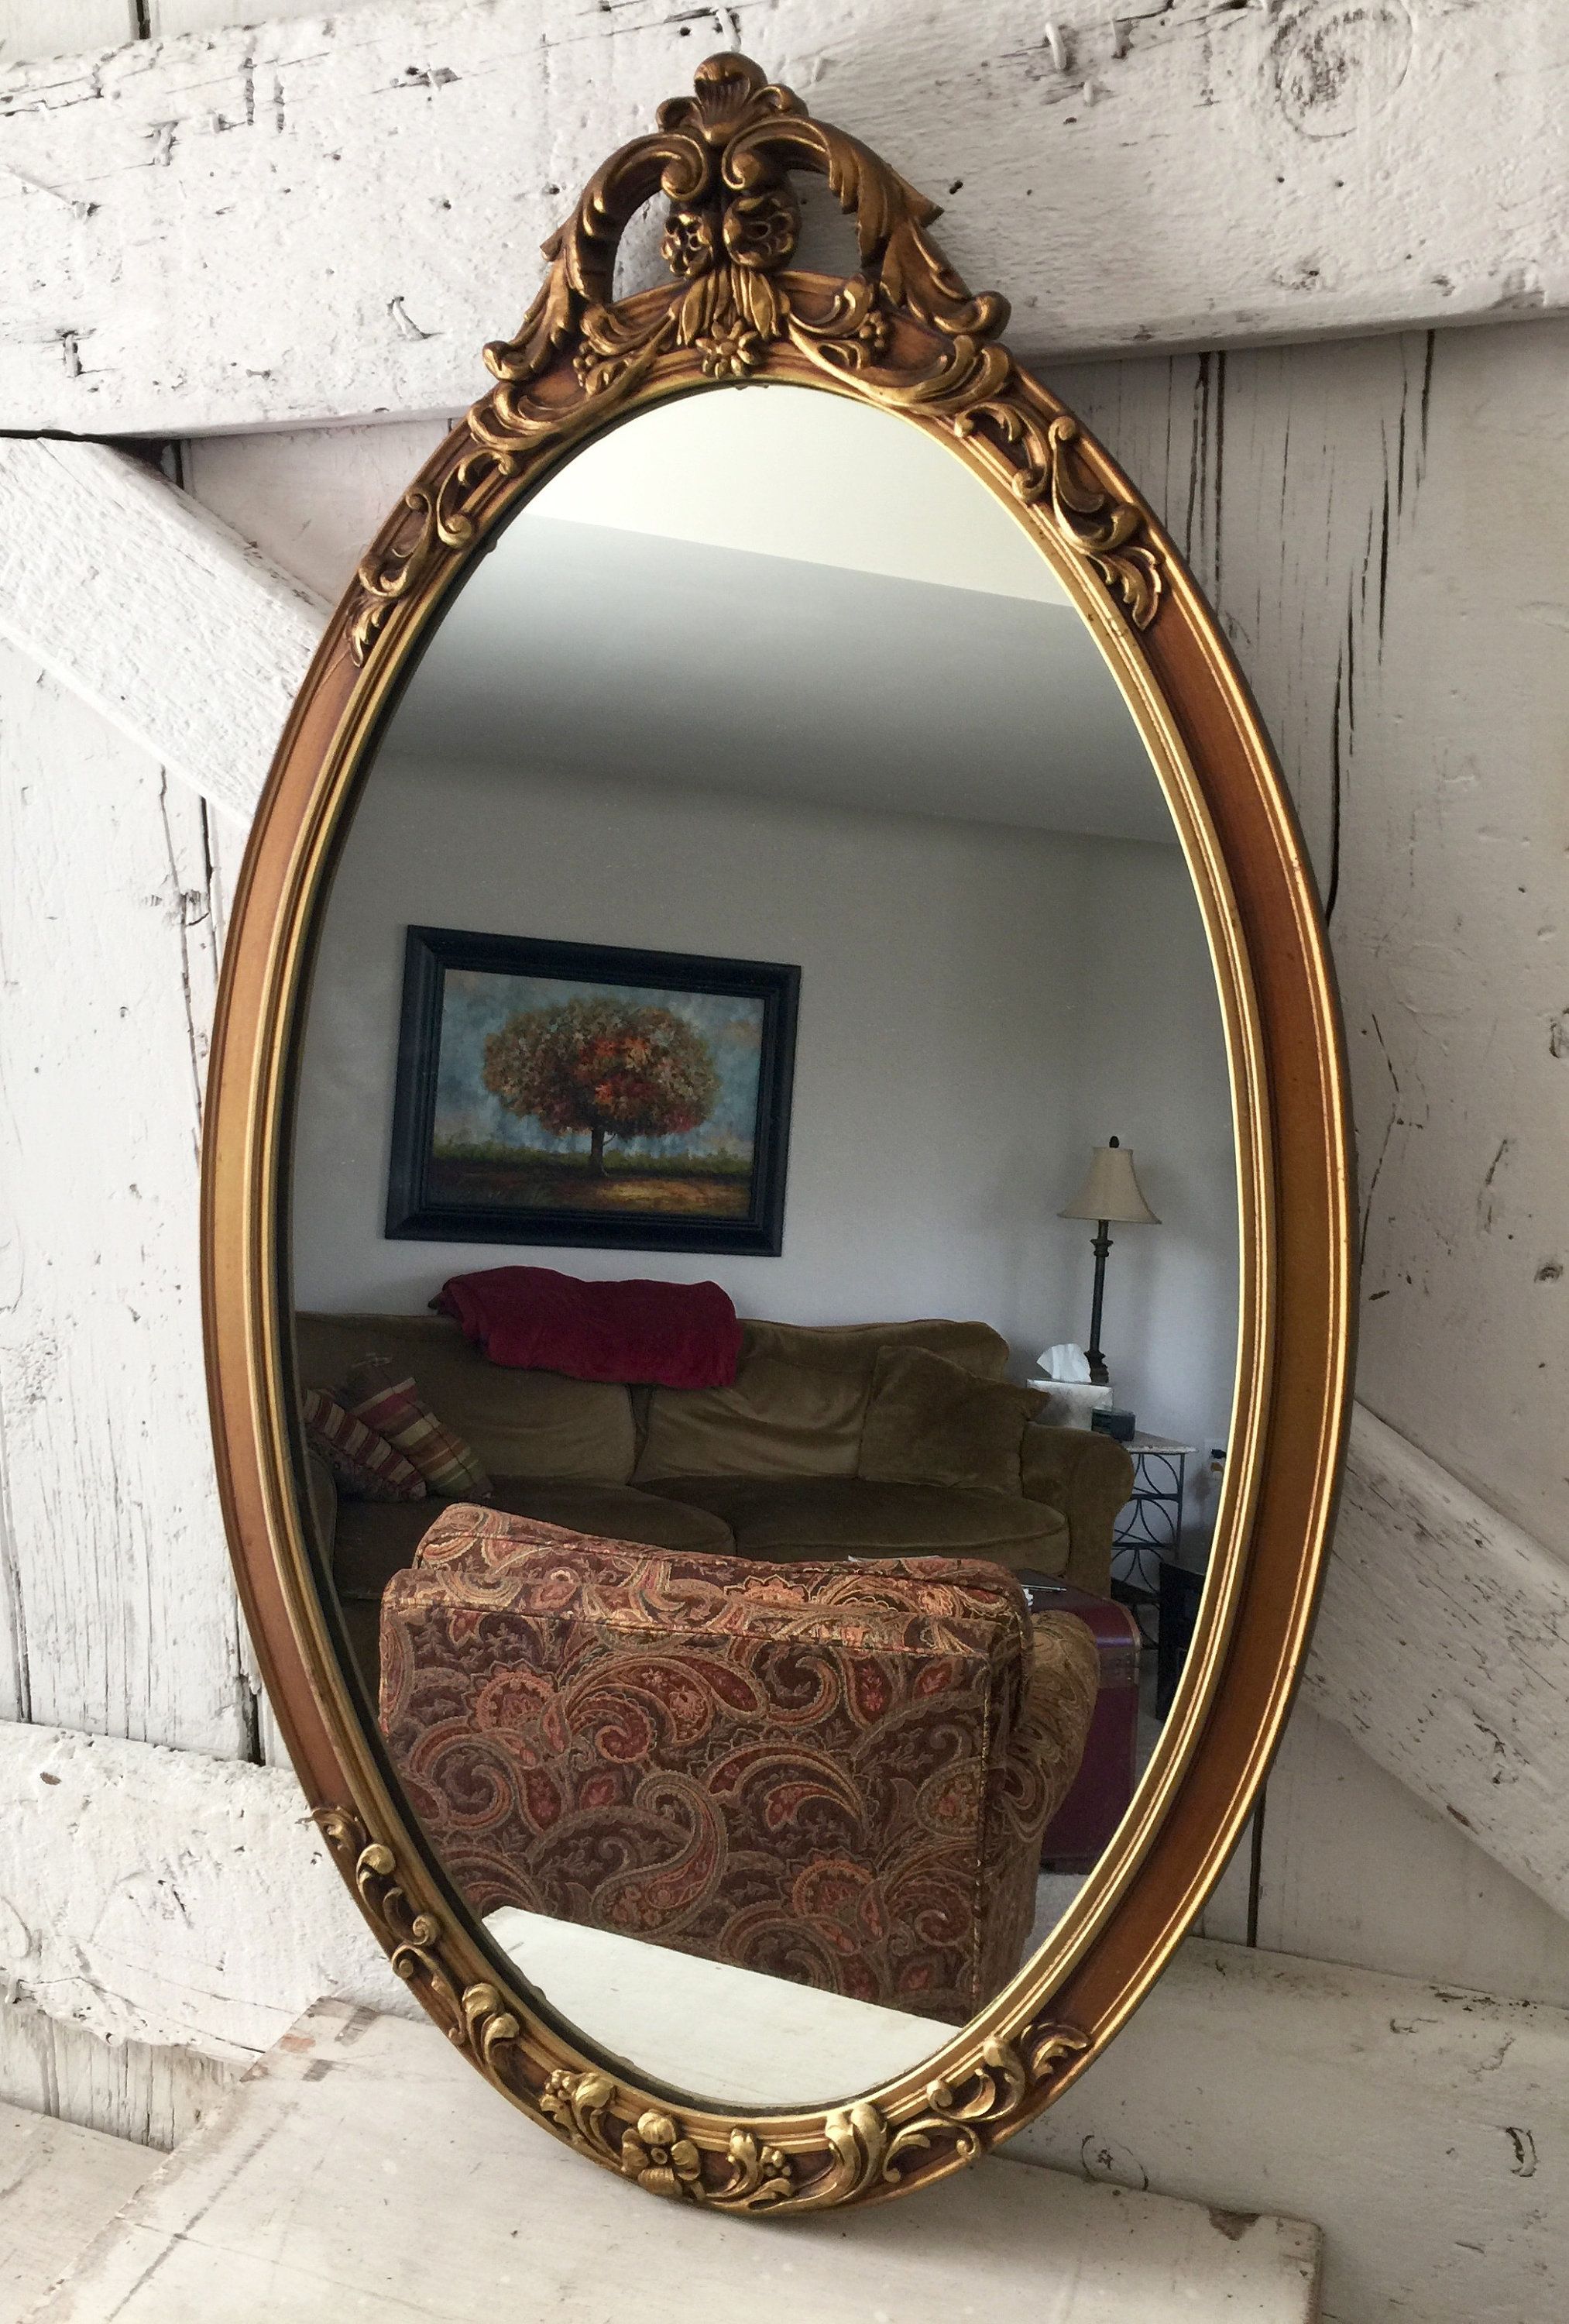 Ausergewohnlich White Vintage Full Length Wall Mirror In Oval Wood Wall Mirrors (View 20 of 20)